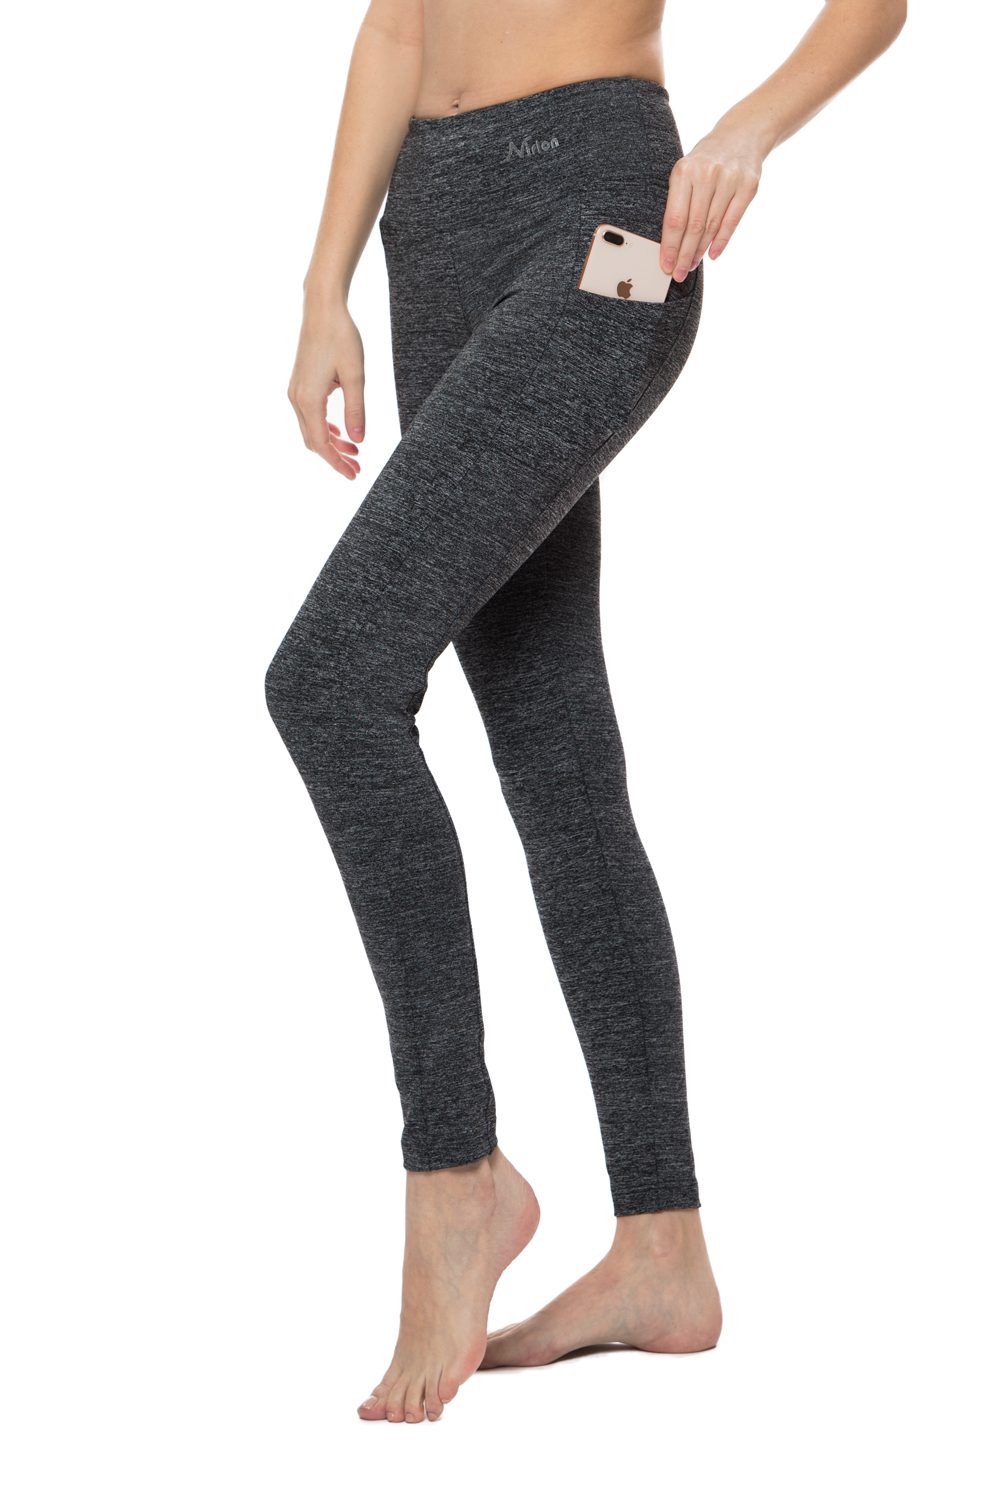 Leggings With Pockets for Women – ME Charcoal – Nirlon